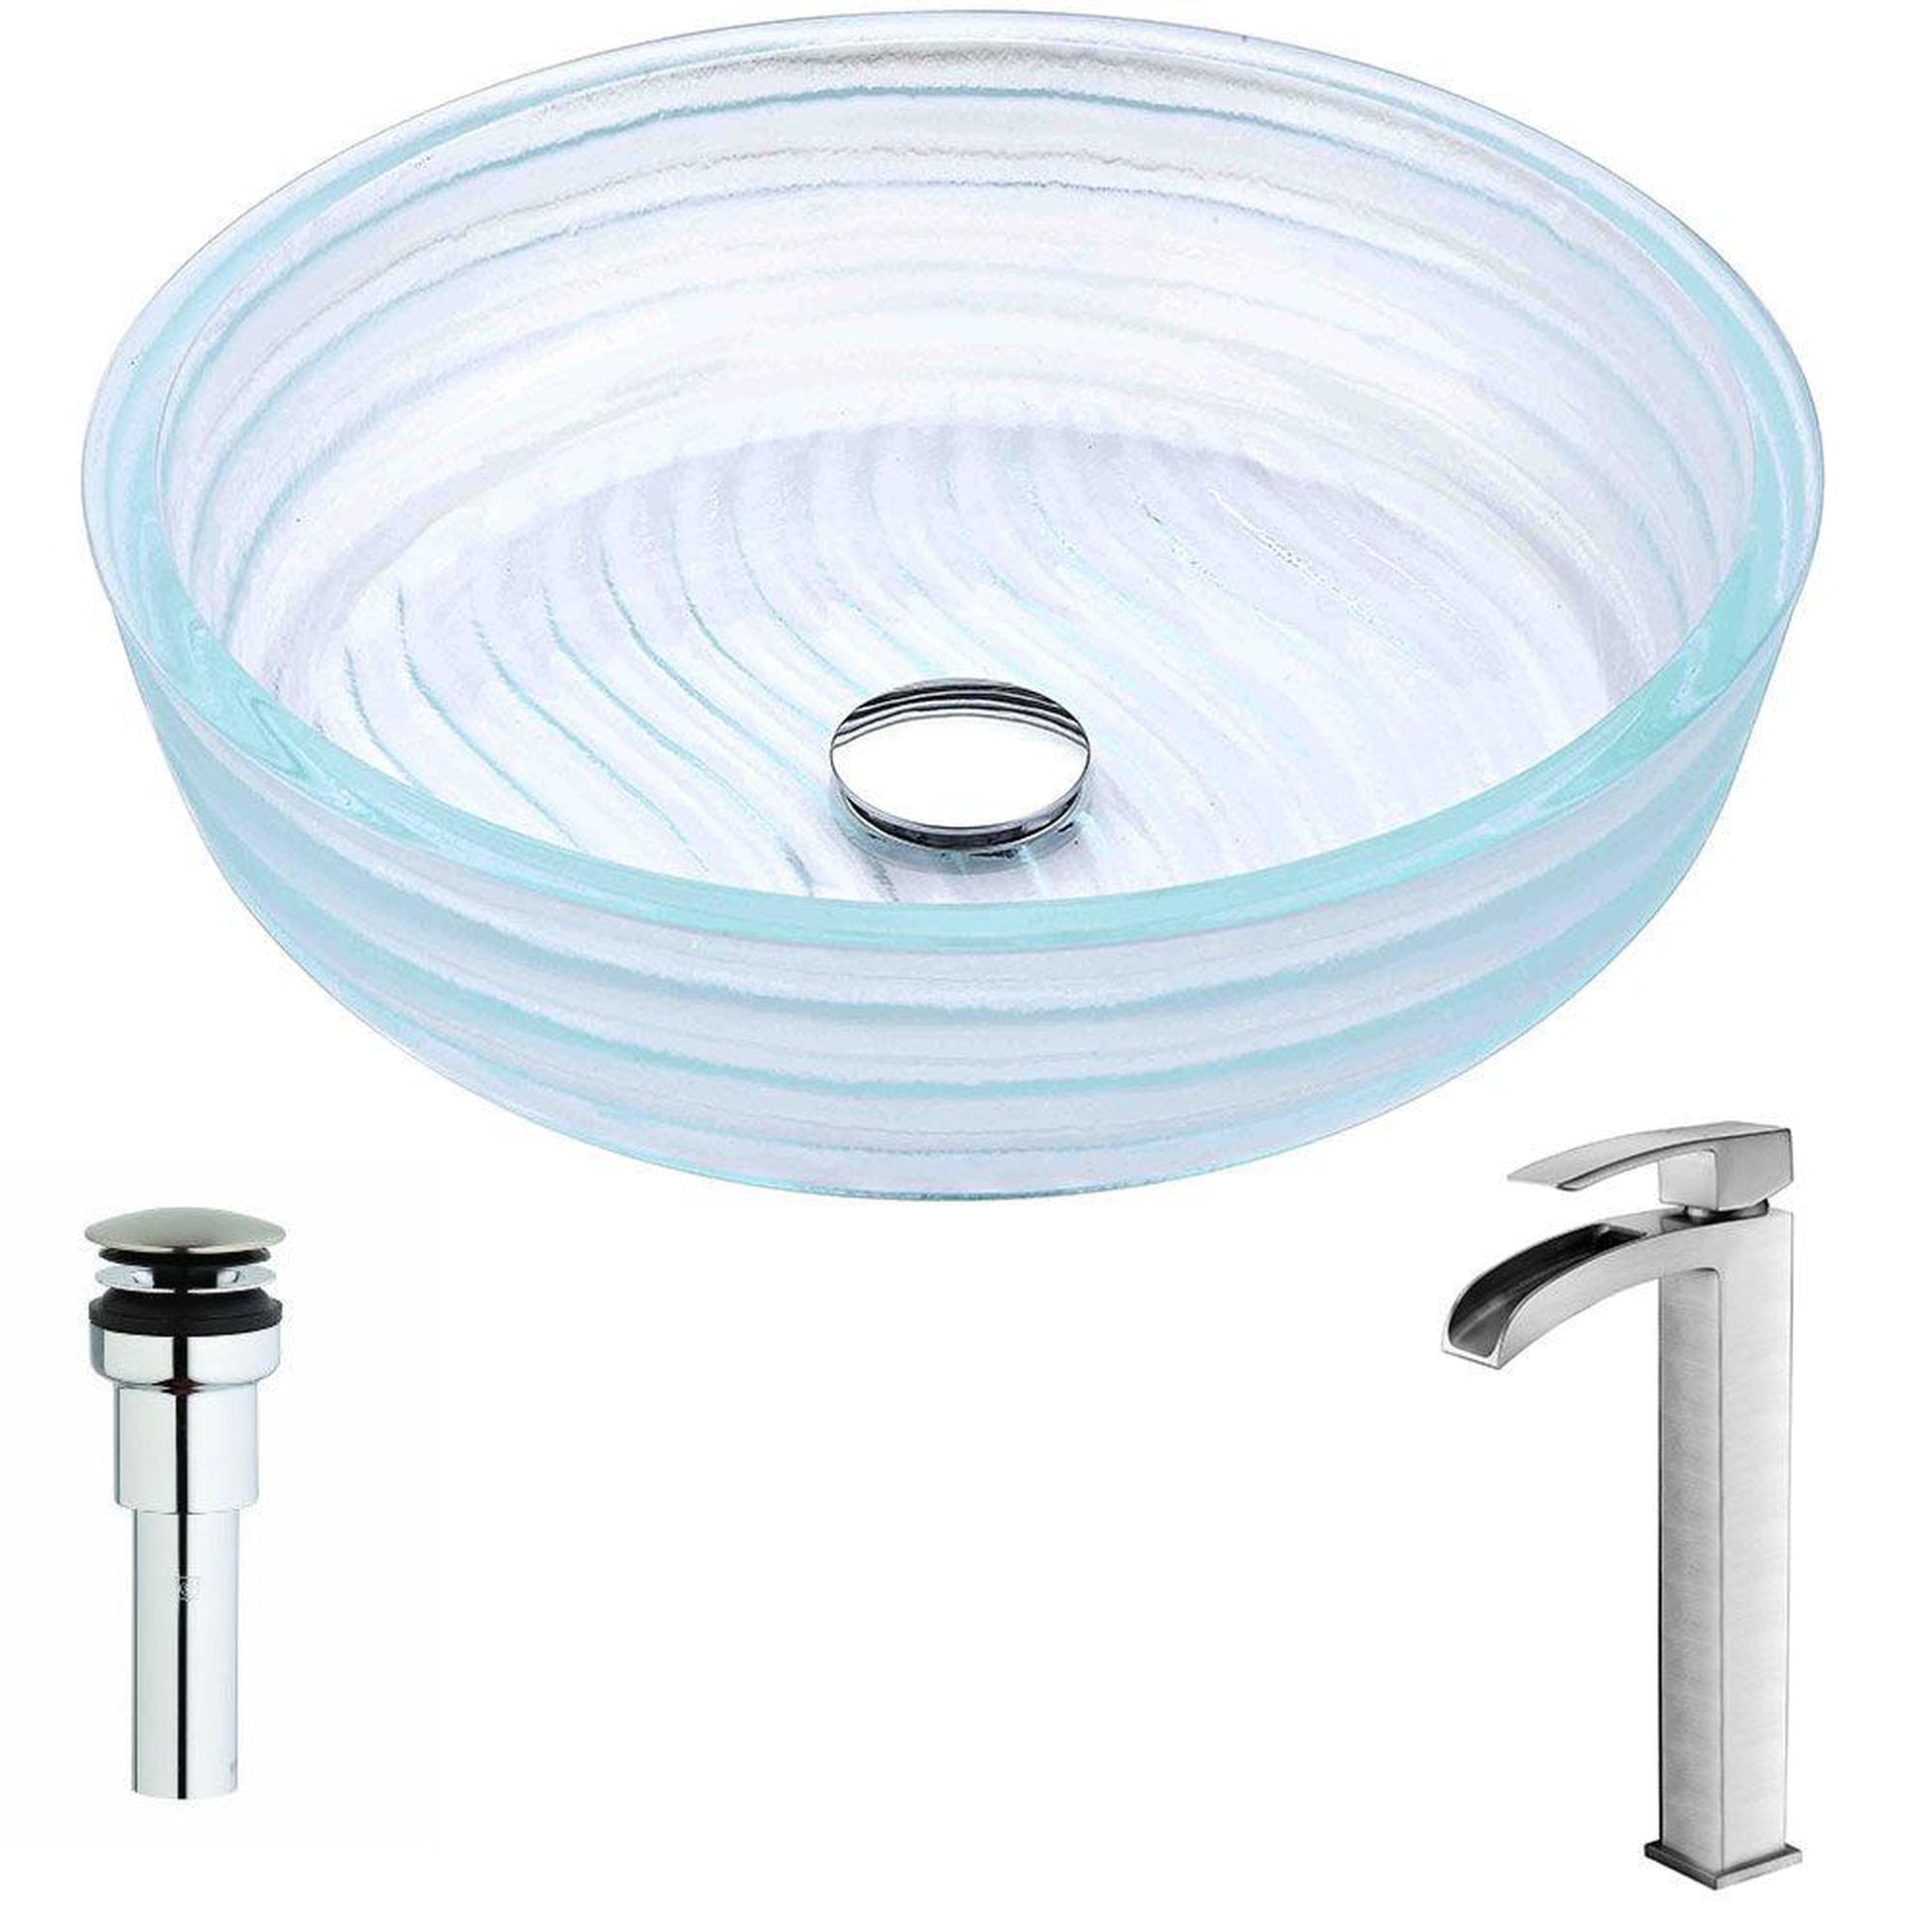 ANZZI Canta Series 17" x 17" Translucent Crystal Cylinder Shape Deco-Glass Vessel Sink With Chrome Pop-Up Drain and Key Faucet